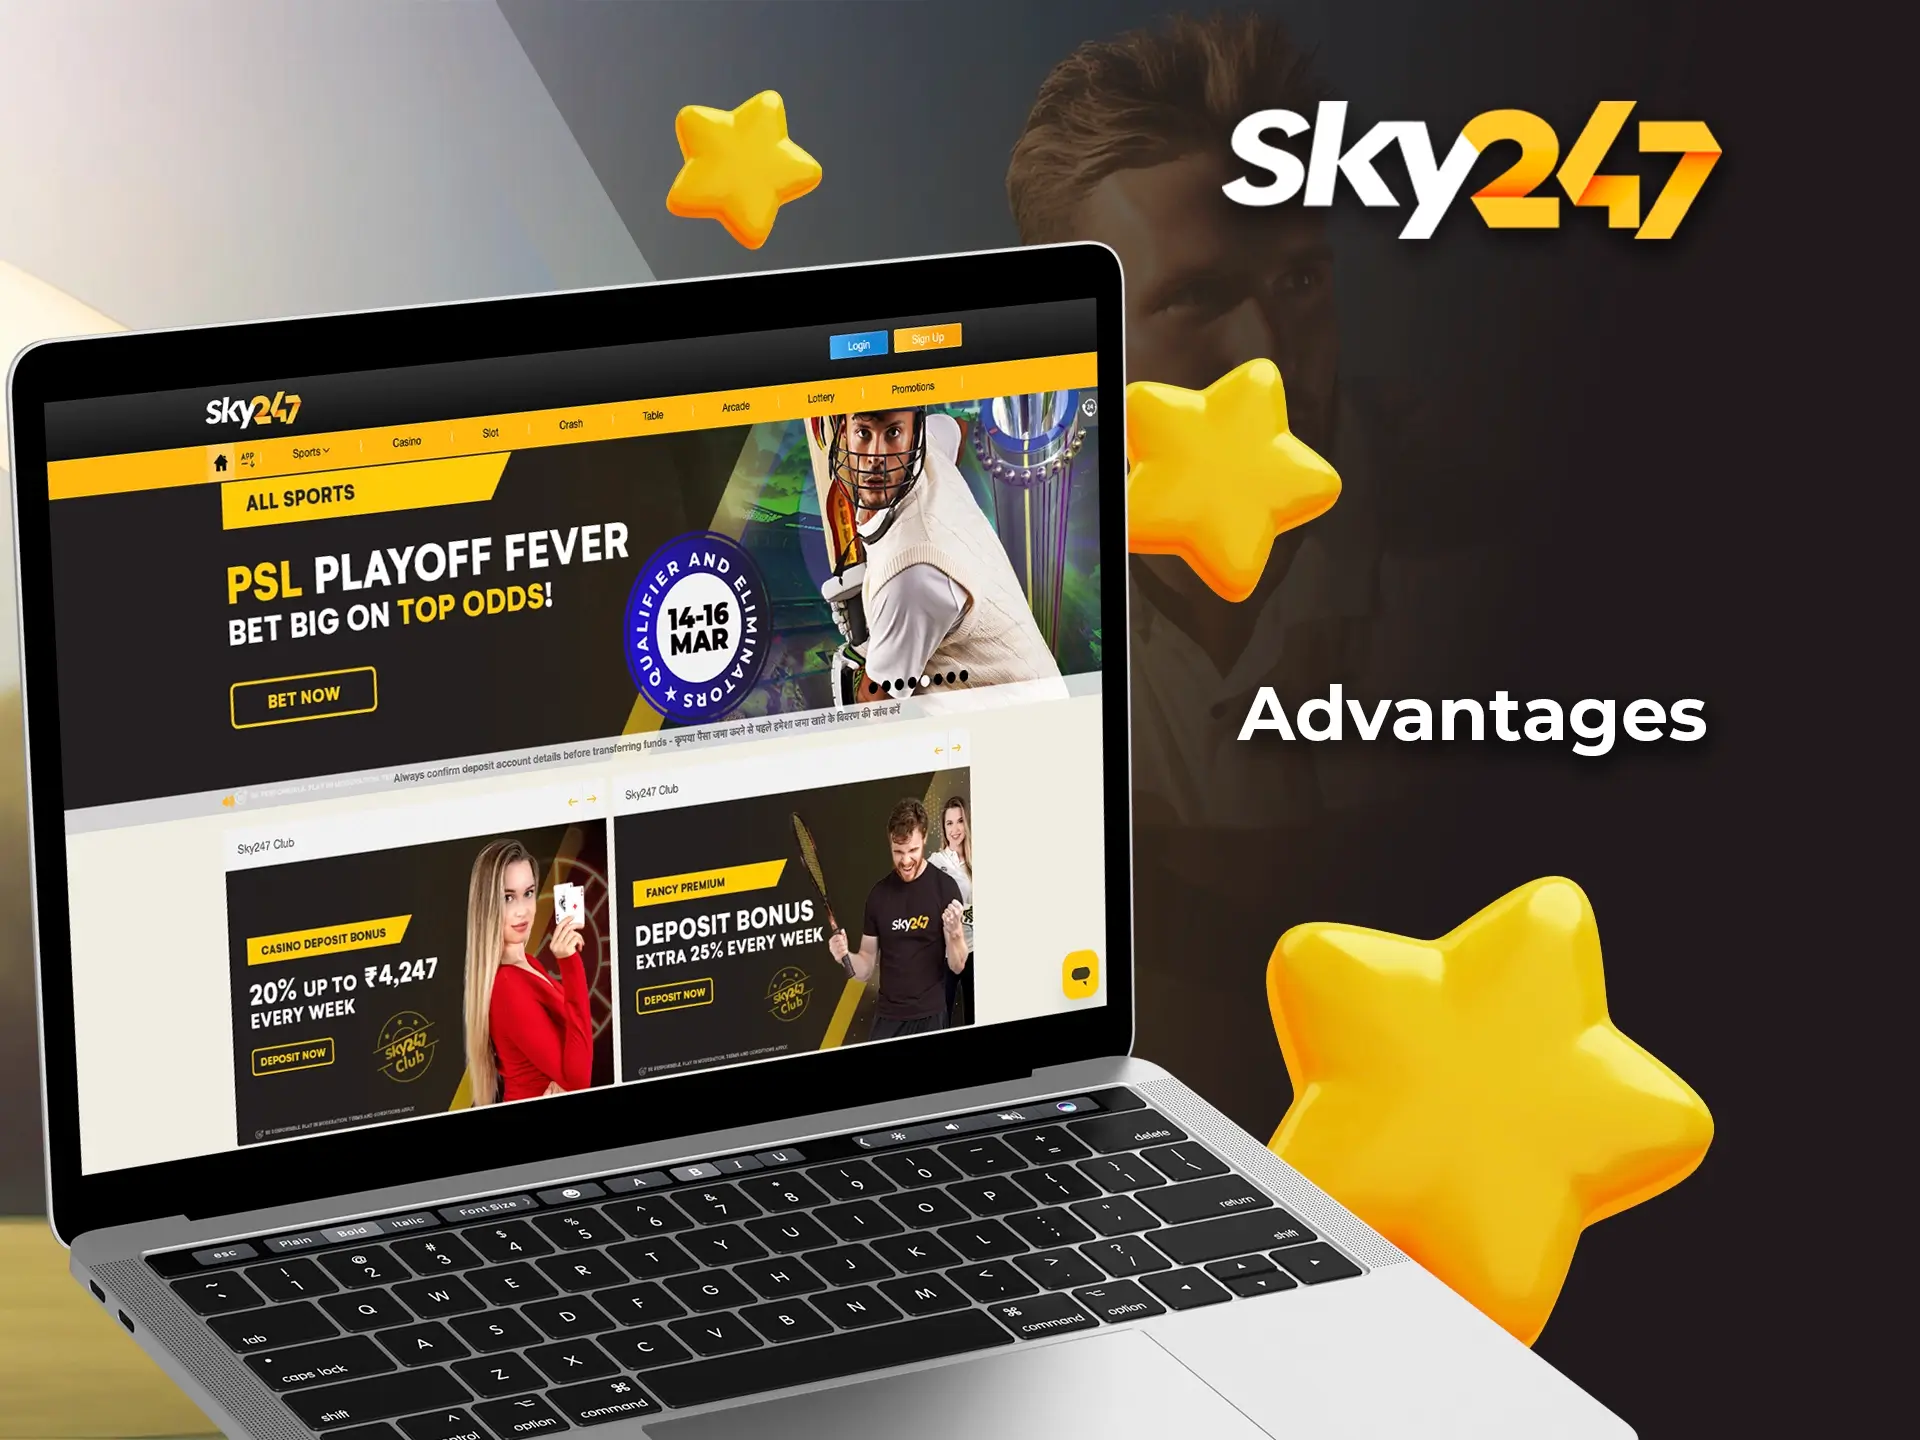 Use bookmaker Sky247 for your betting needs and introduction to the sport of cricket within India.